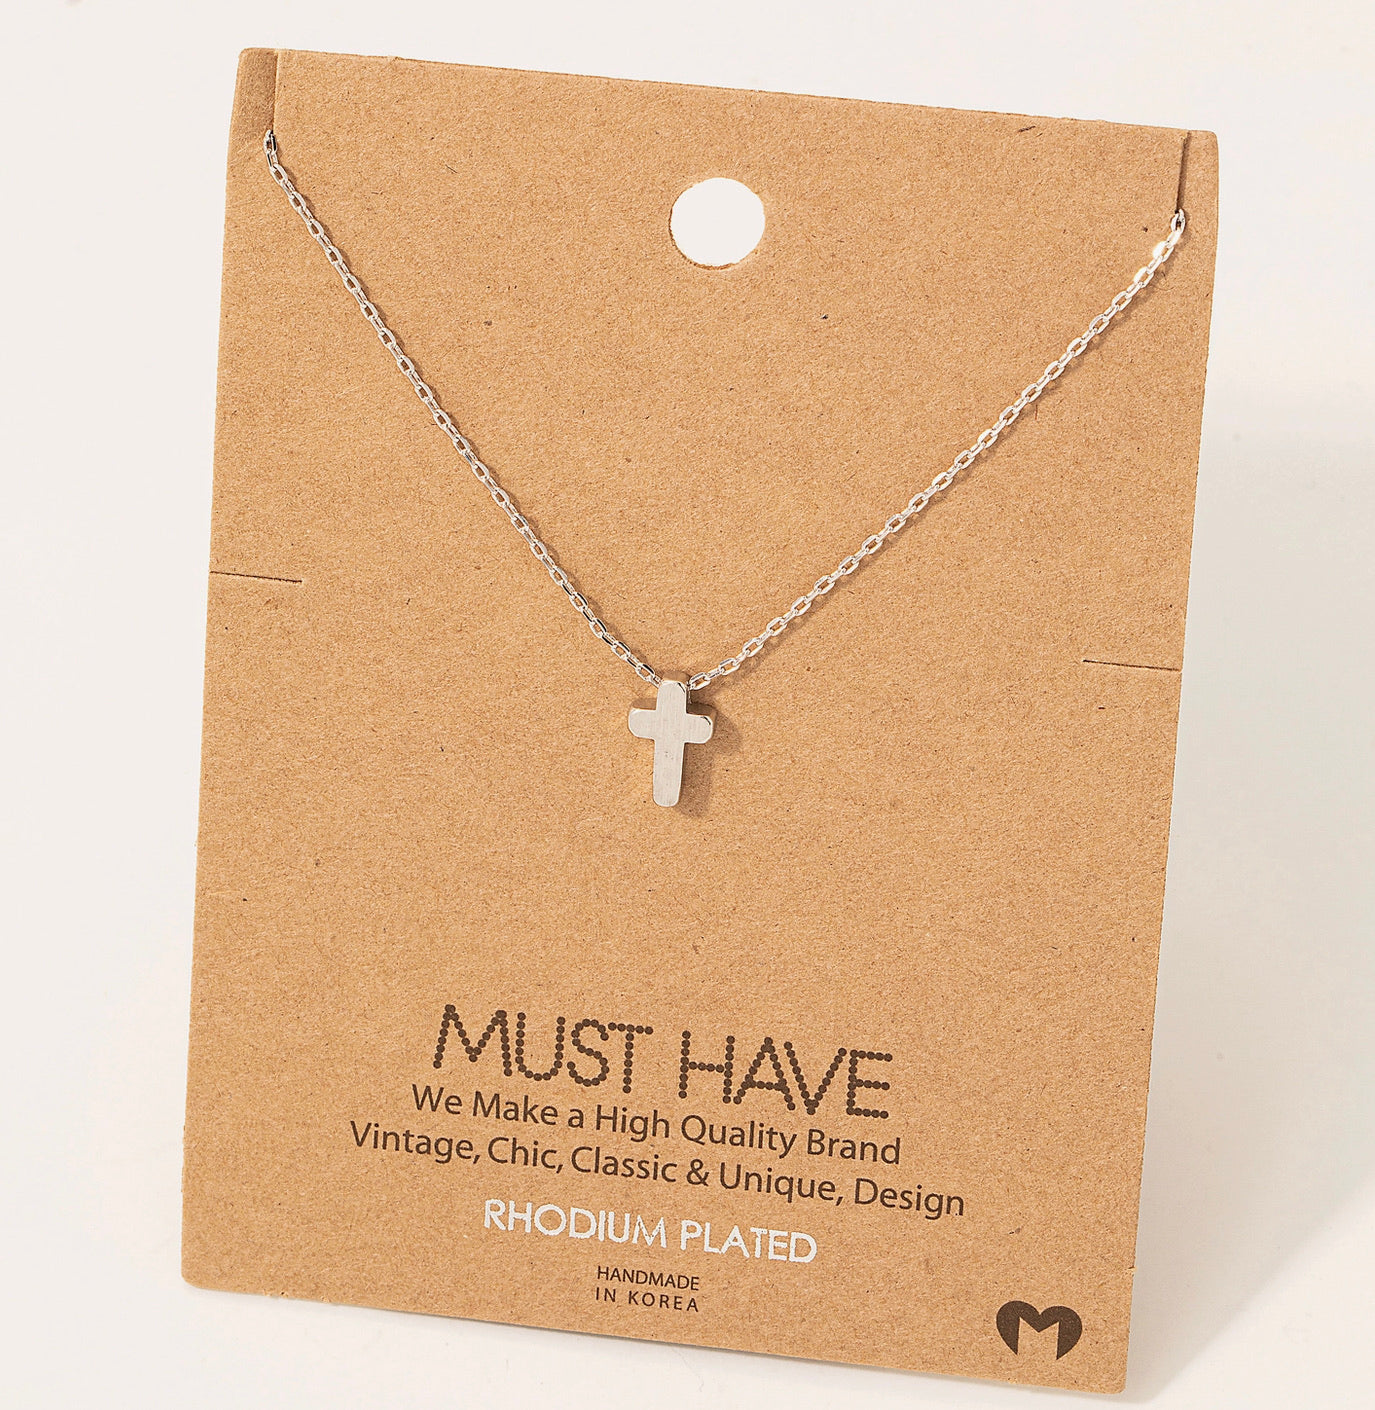 Rhodium Plated Dainty Mini Cross Pendant Necklace 16 + 2 Inches in Length